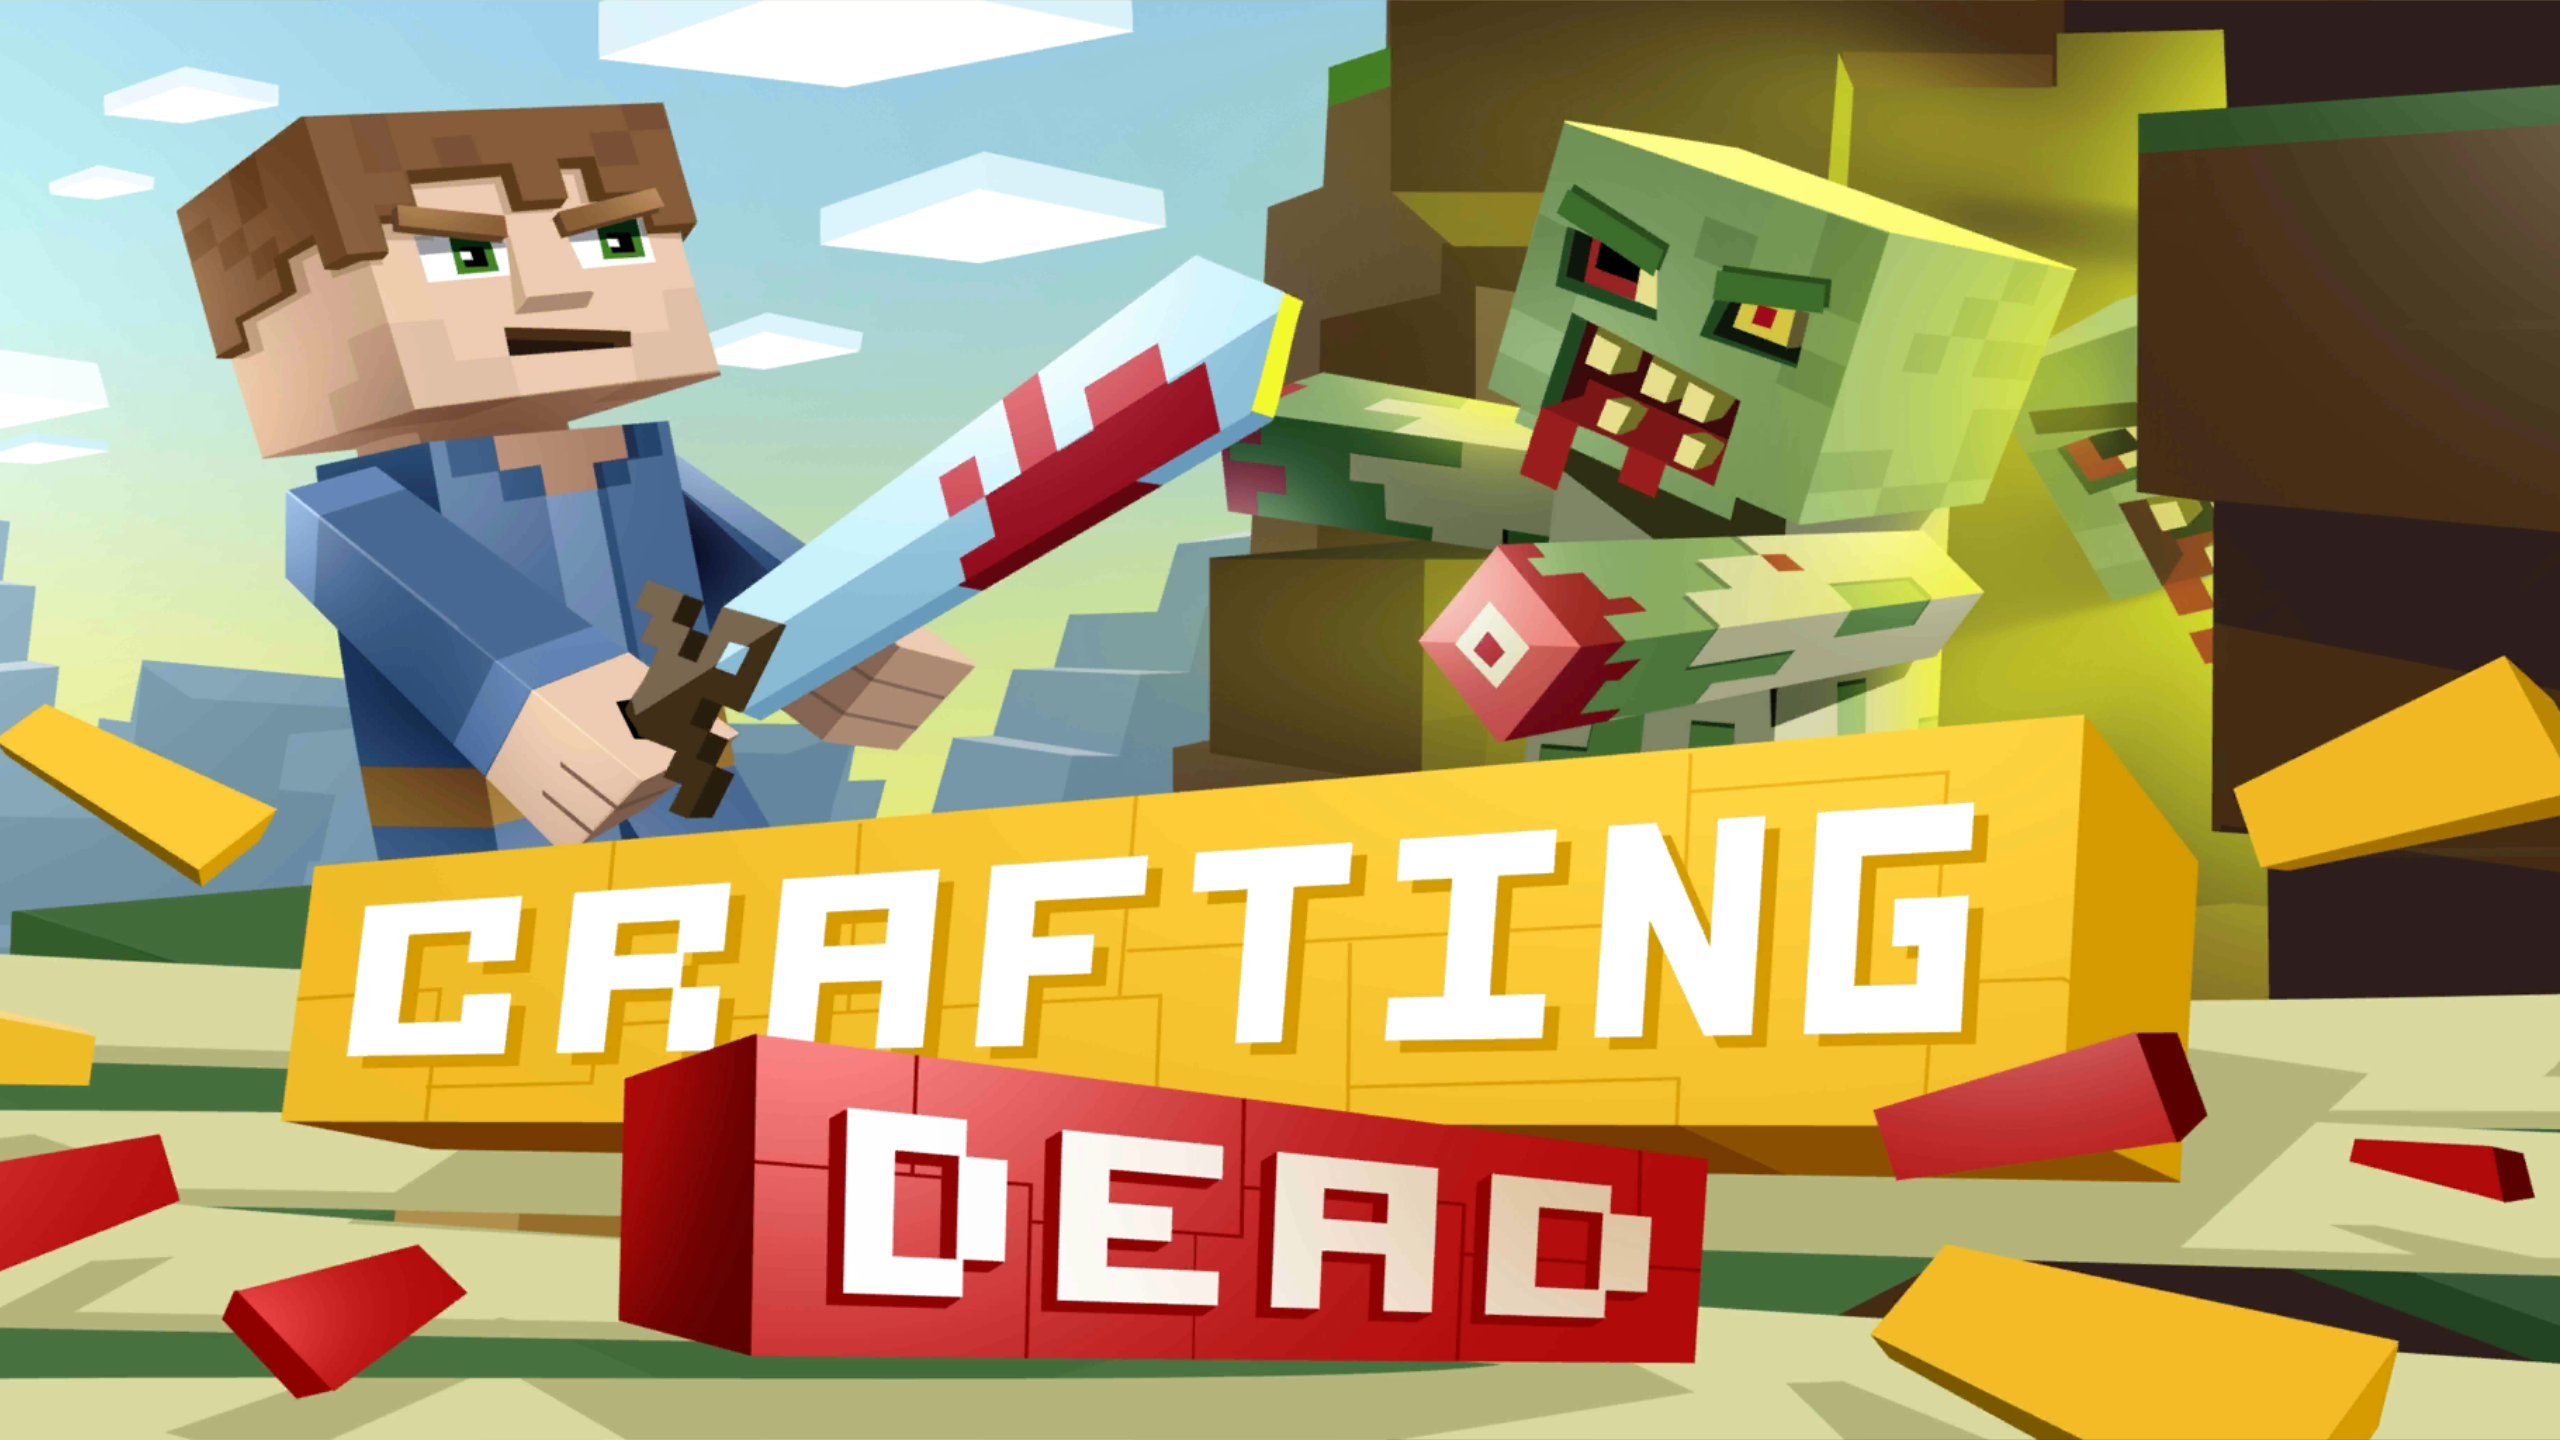 Crafting Dead Windows, Android game - Mod DB